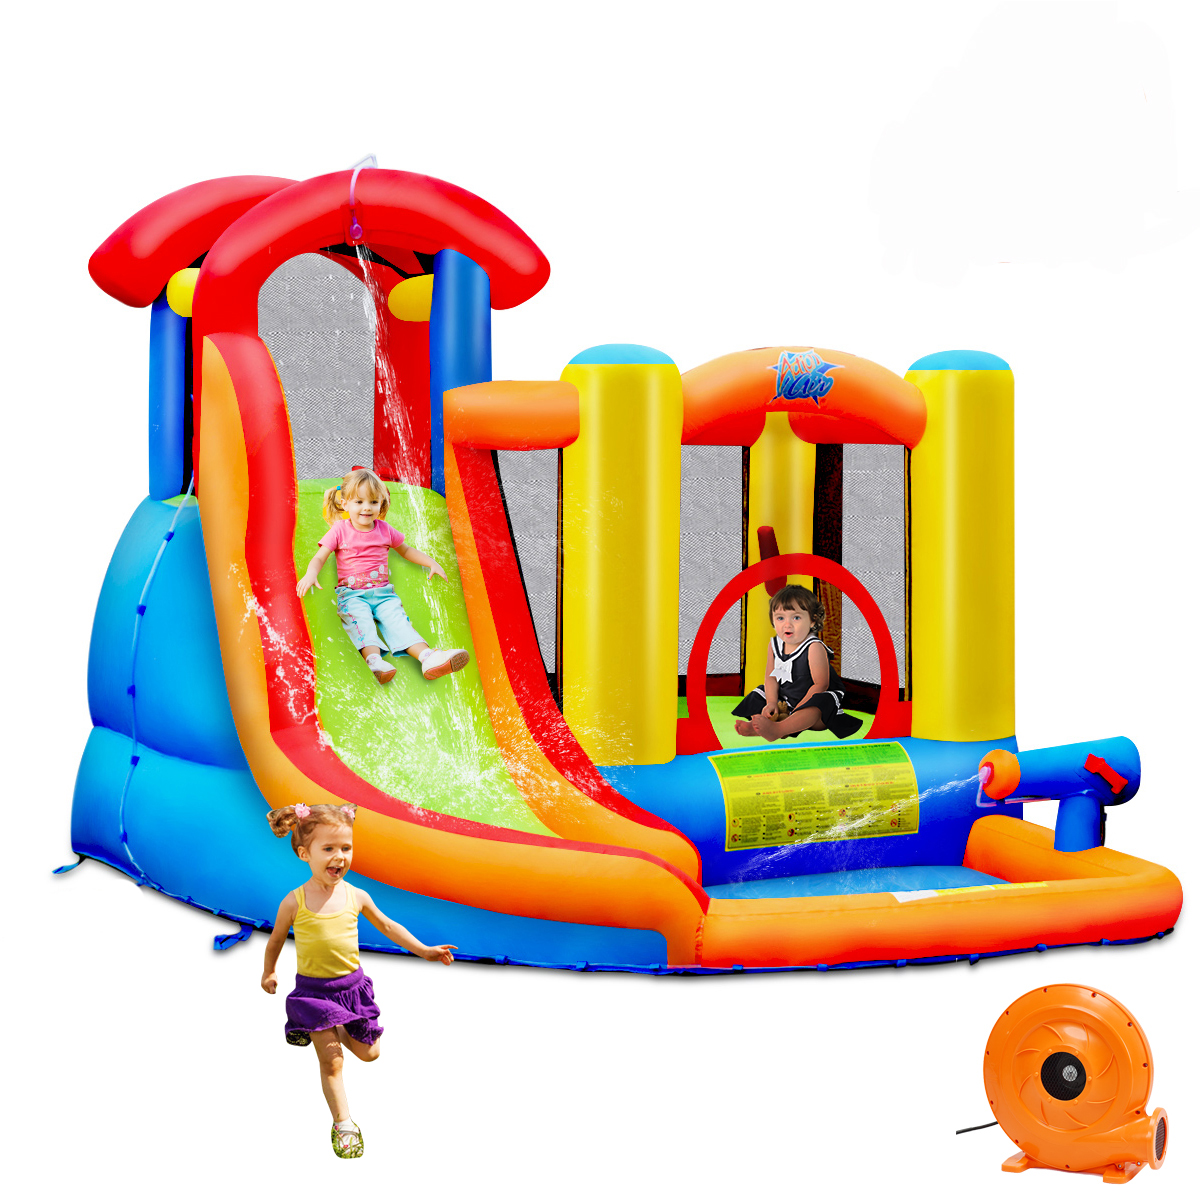 Costway Inflatable Bounce House Kid Water Splash Pool Slide Jumping Castle with 740W Blower